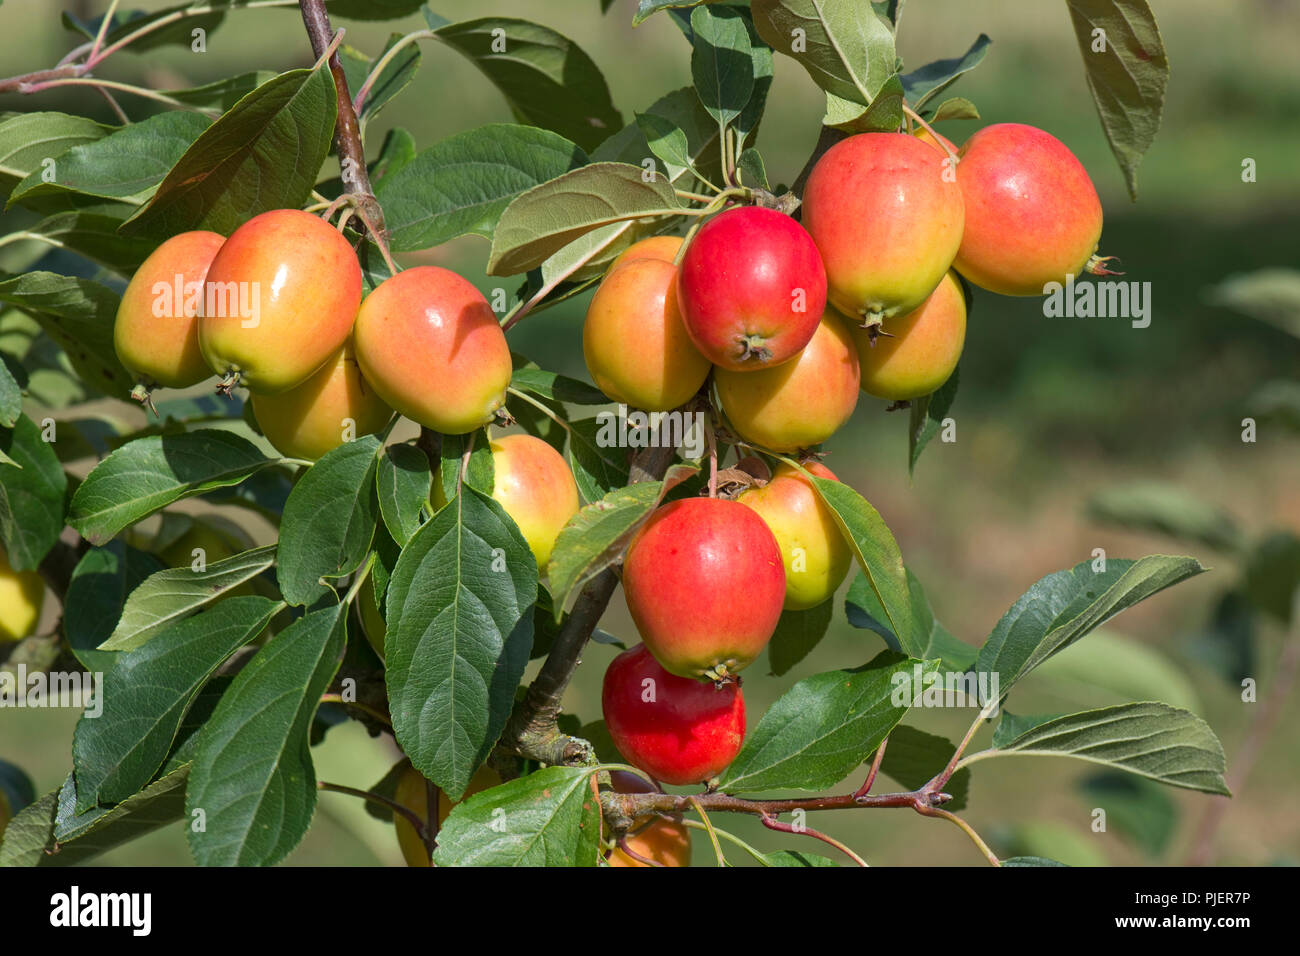 Crab apple, Malus 'John Downie', with red, orange-yellow ovoid fruit on the tree, Berkshire, August Stock Photo